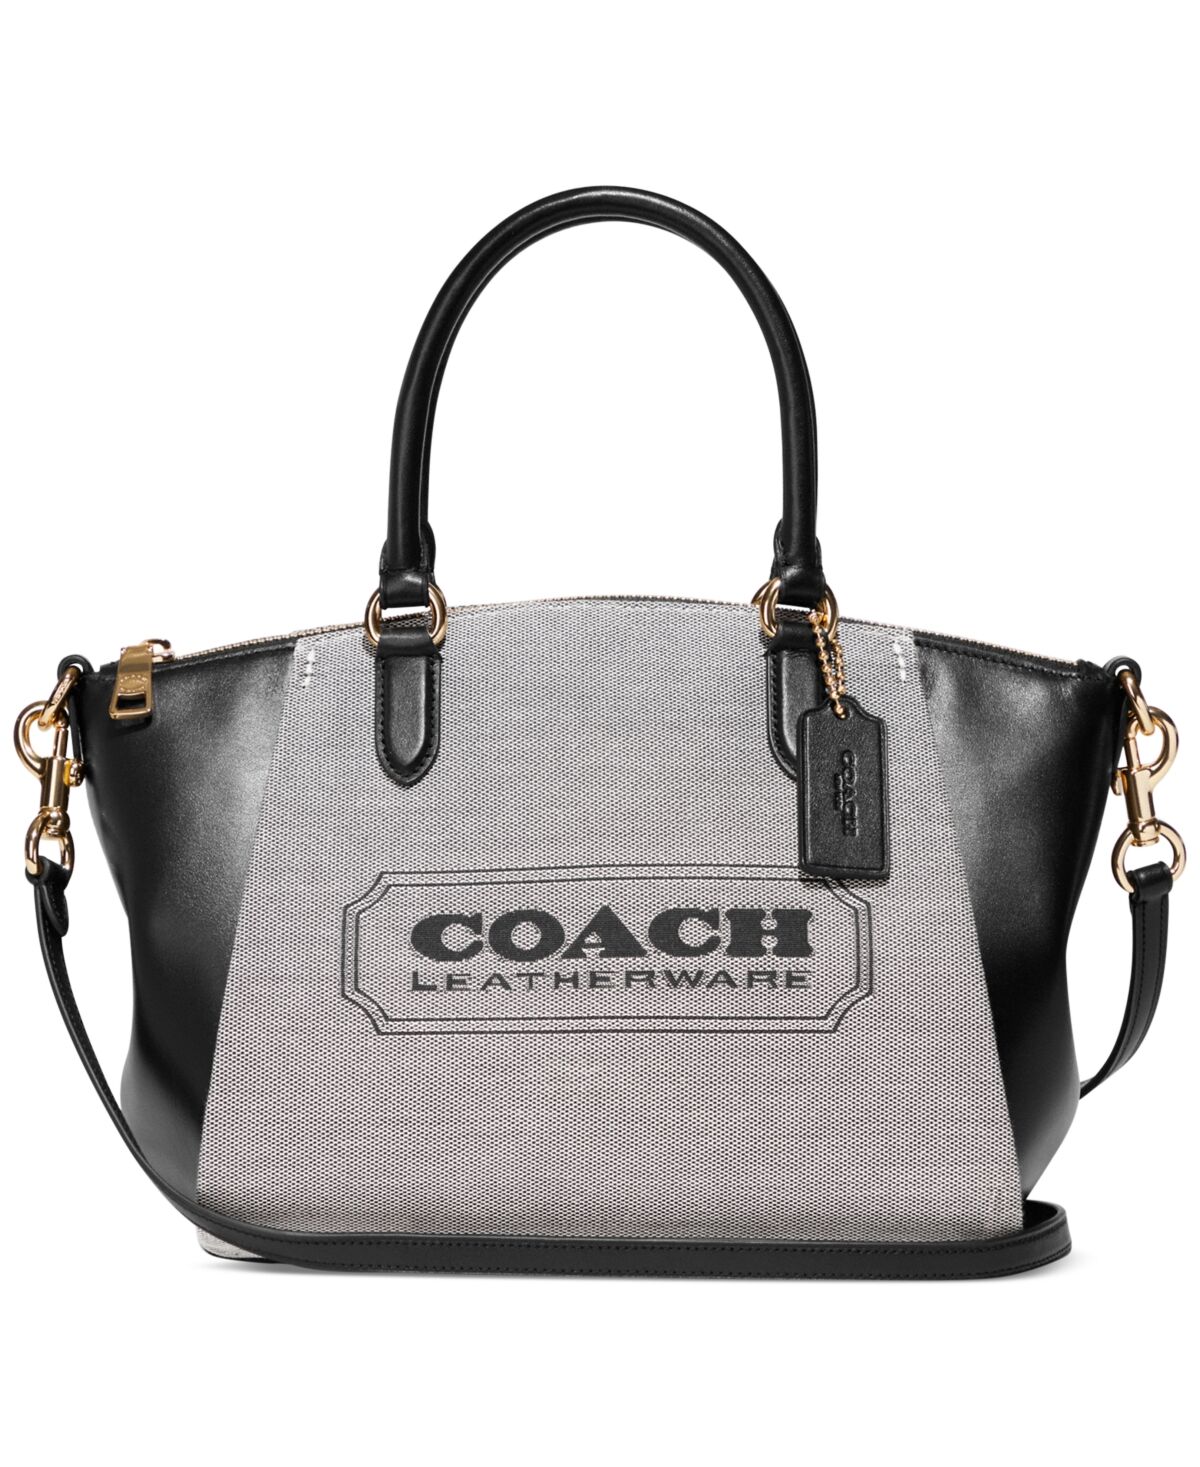 Coach Badge Jacquard Elise Satchel with Convertible Straps, Created for Macy's - Salt Black